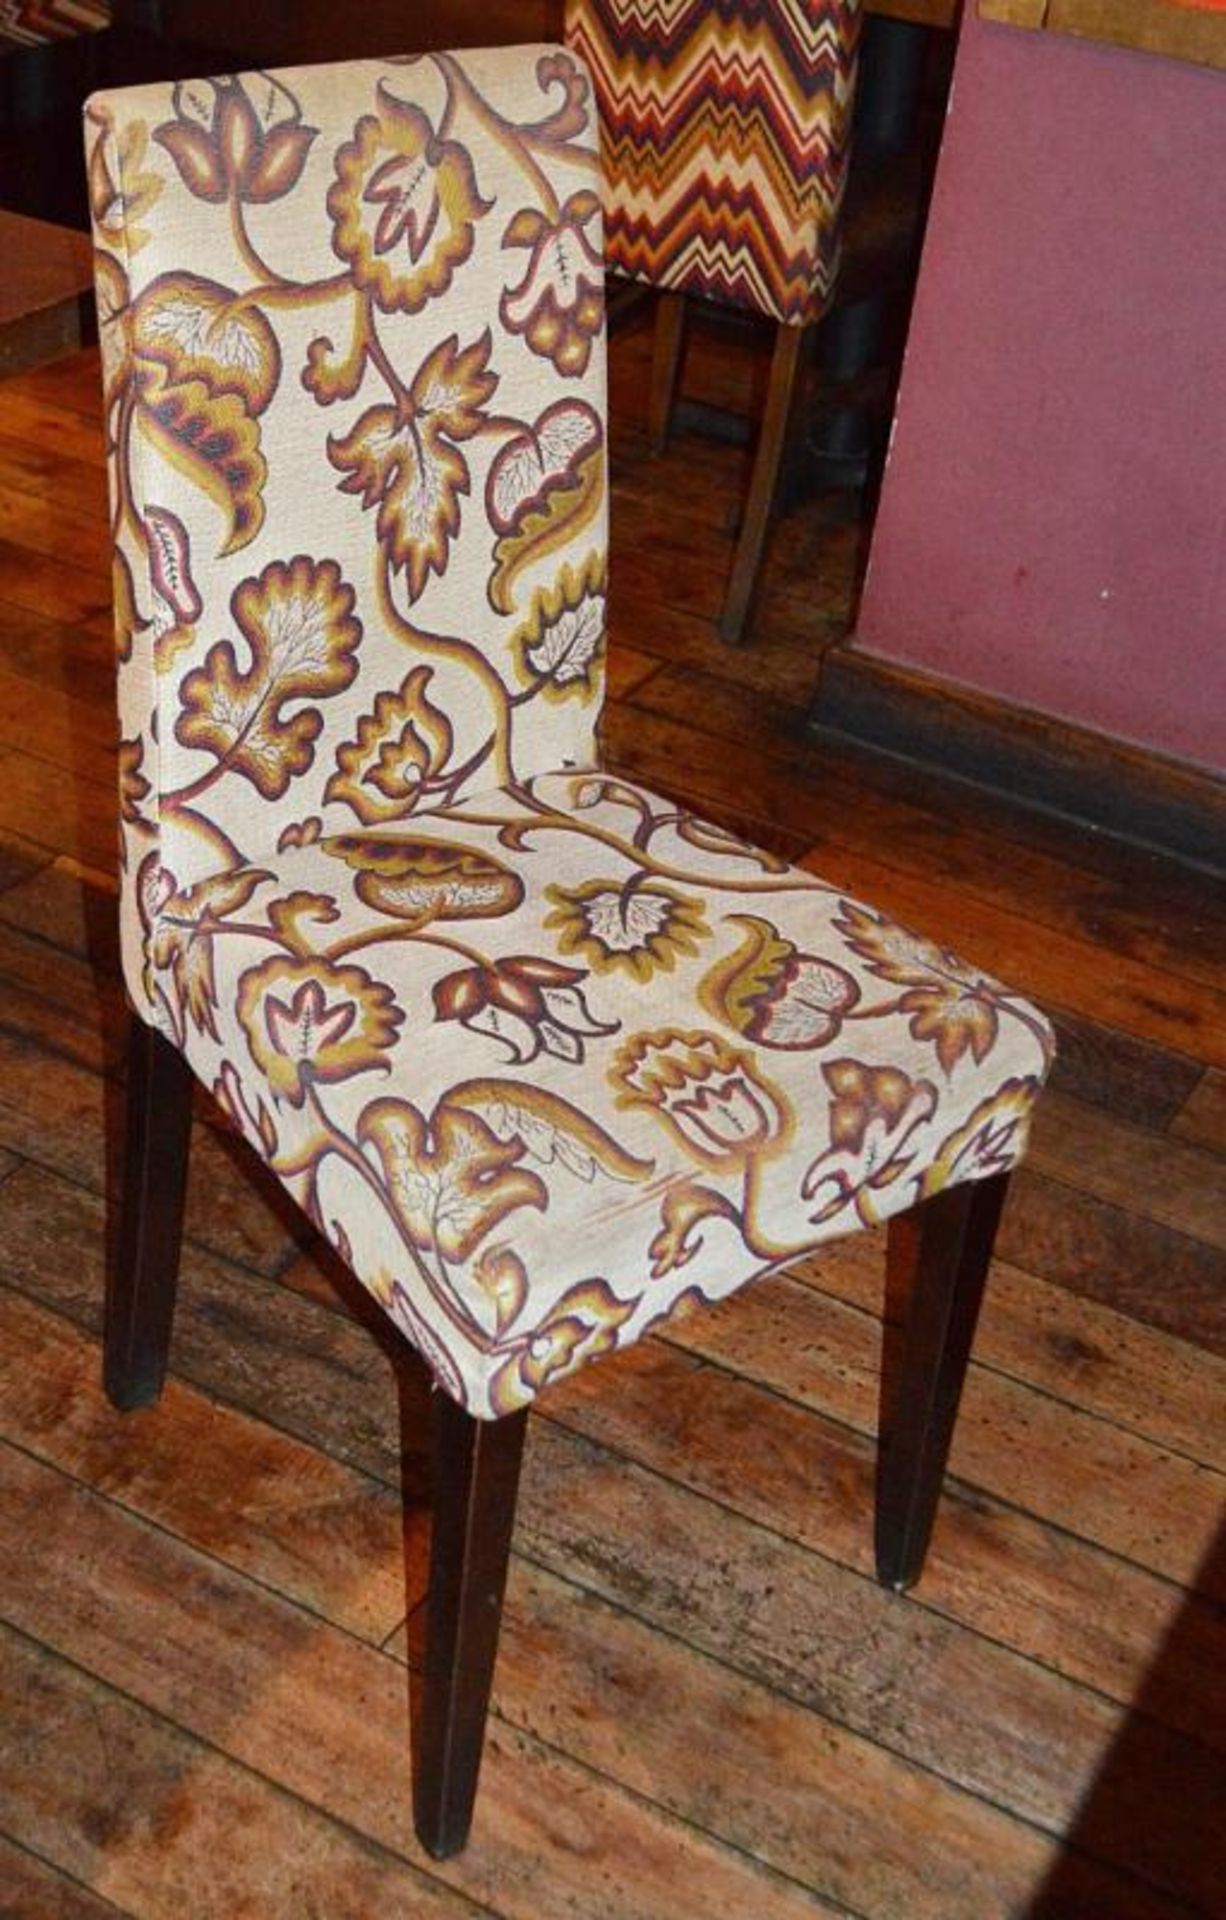 6 x Upholstered Restaurant Dining Chairs In A Floral Mexican-style Fabric